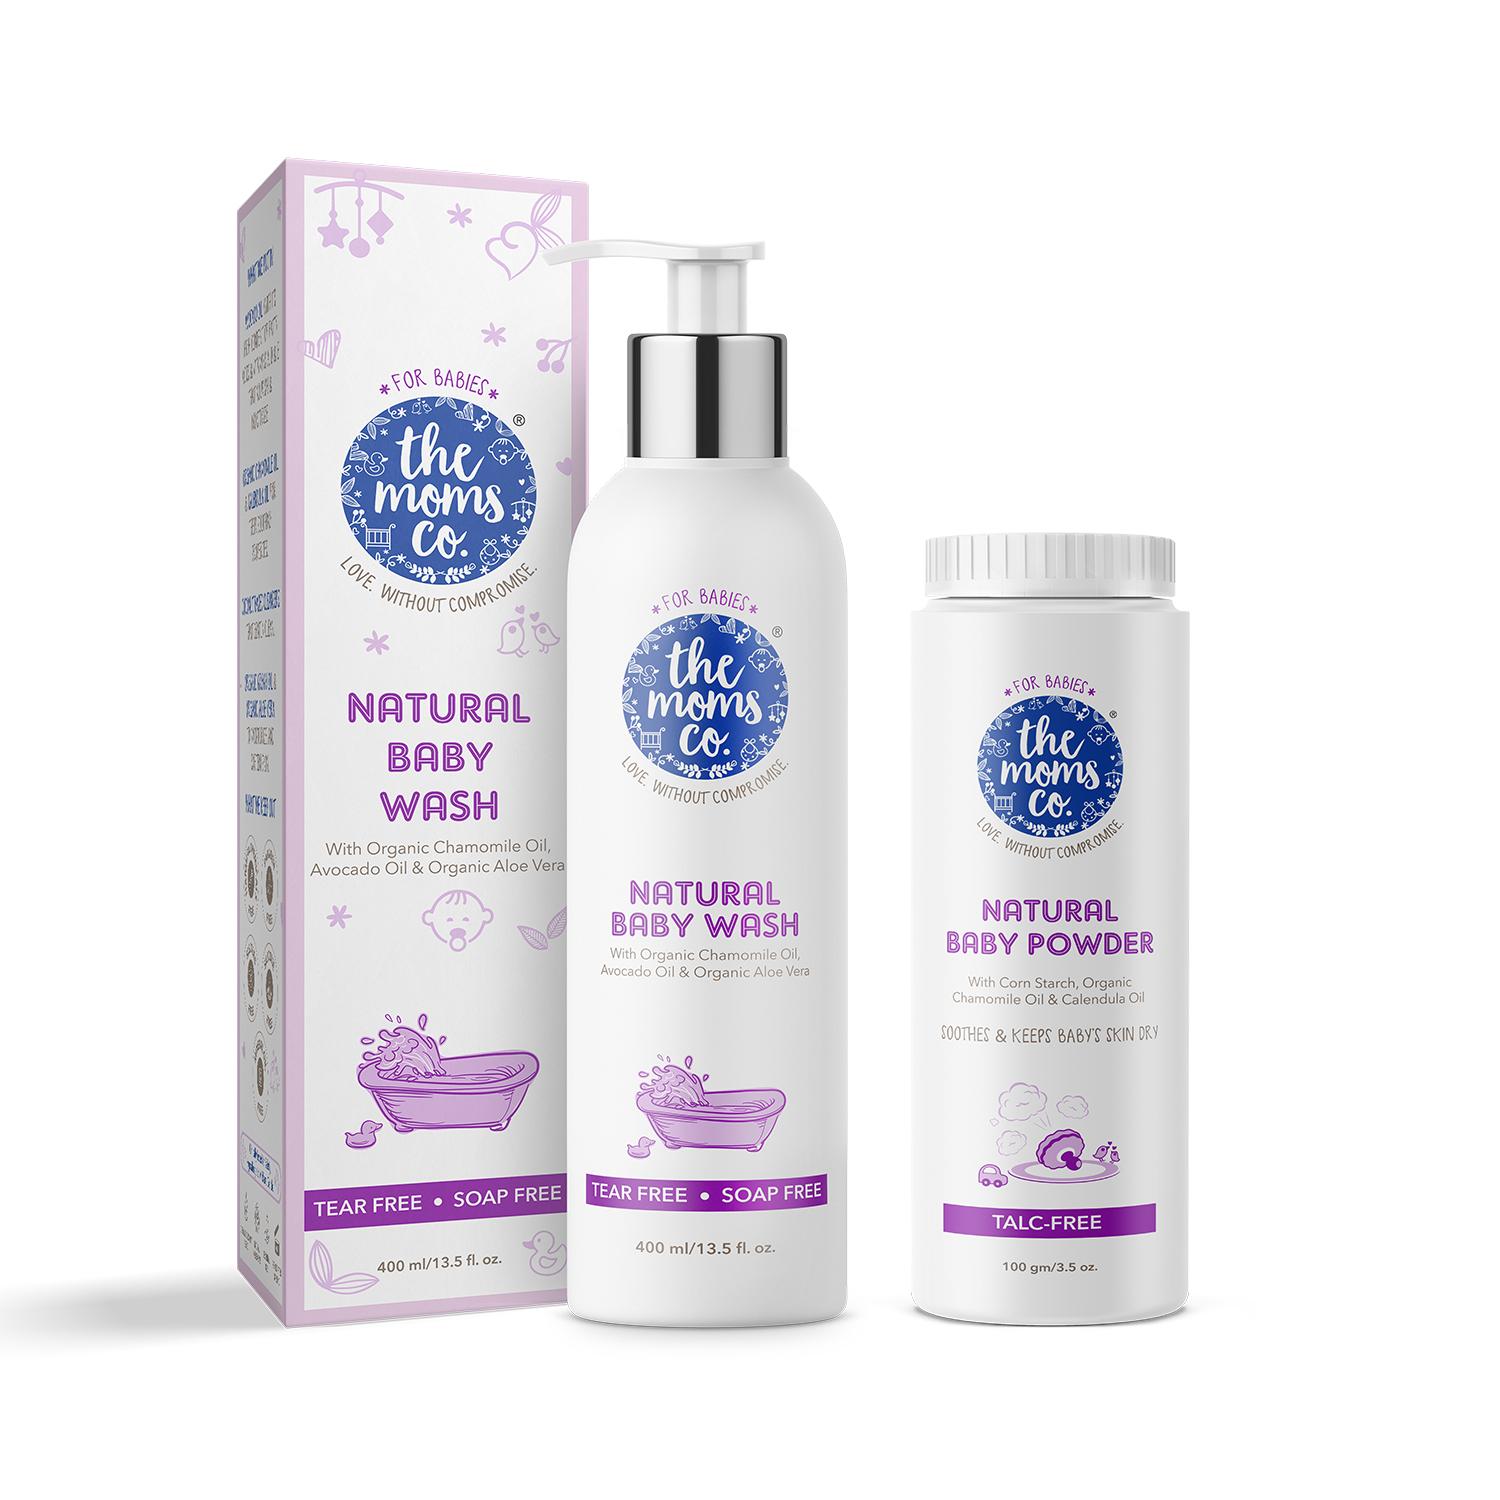 The Mom's Co. | The Mom's Co. Talc-Free Natural Baby Powder & Natural Baby Wash Combo